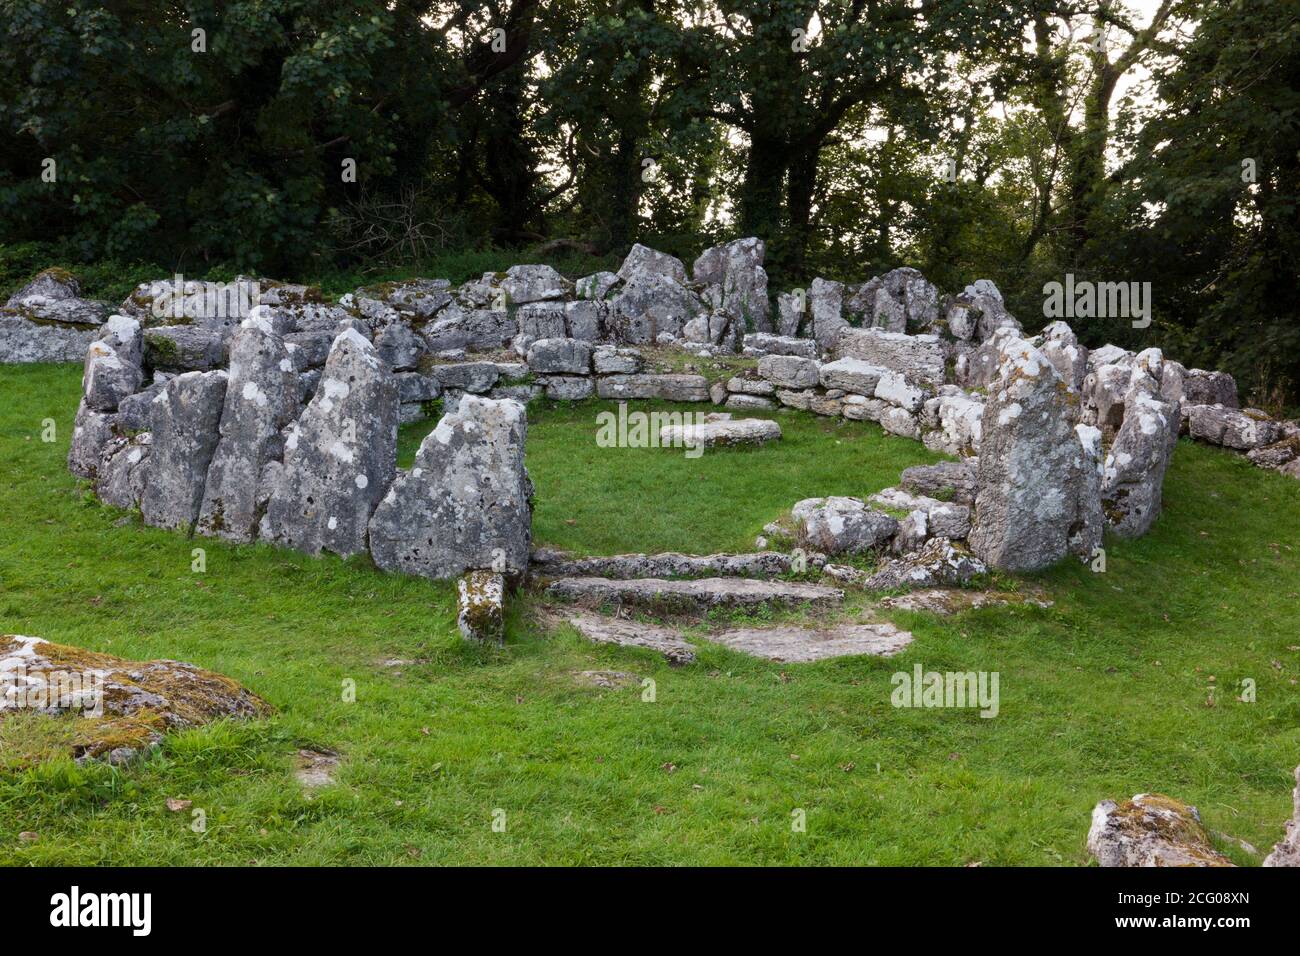 Din Lligwy is the remains of an ancient, Iron Age village near Moelfre on Anglesey, North Wales. It was still occupied during the Roman occupation. Stock Photo